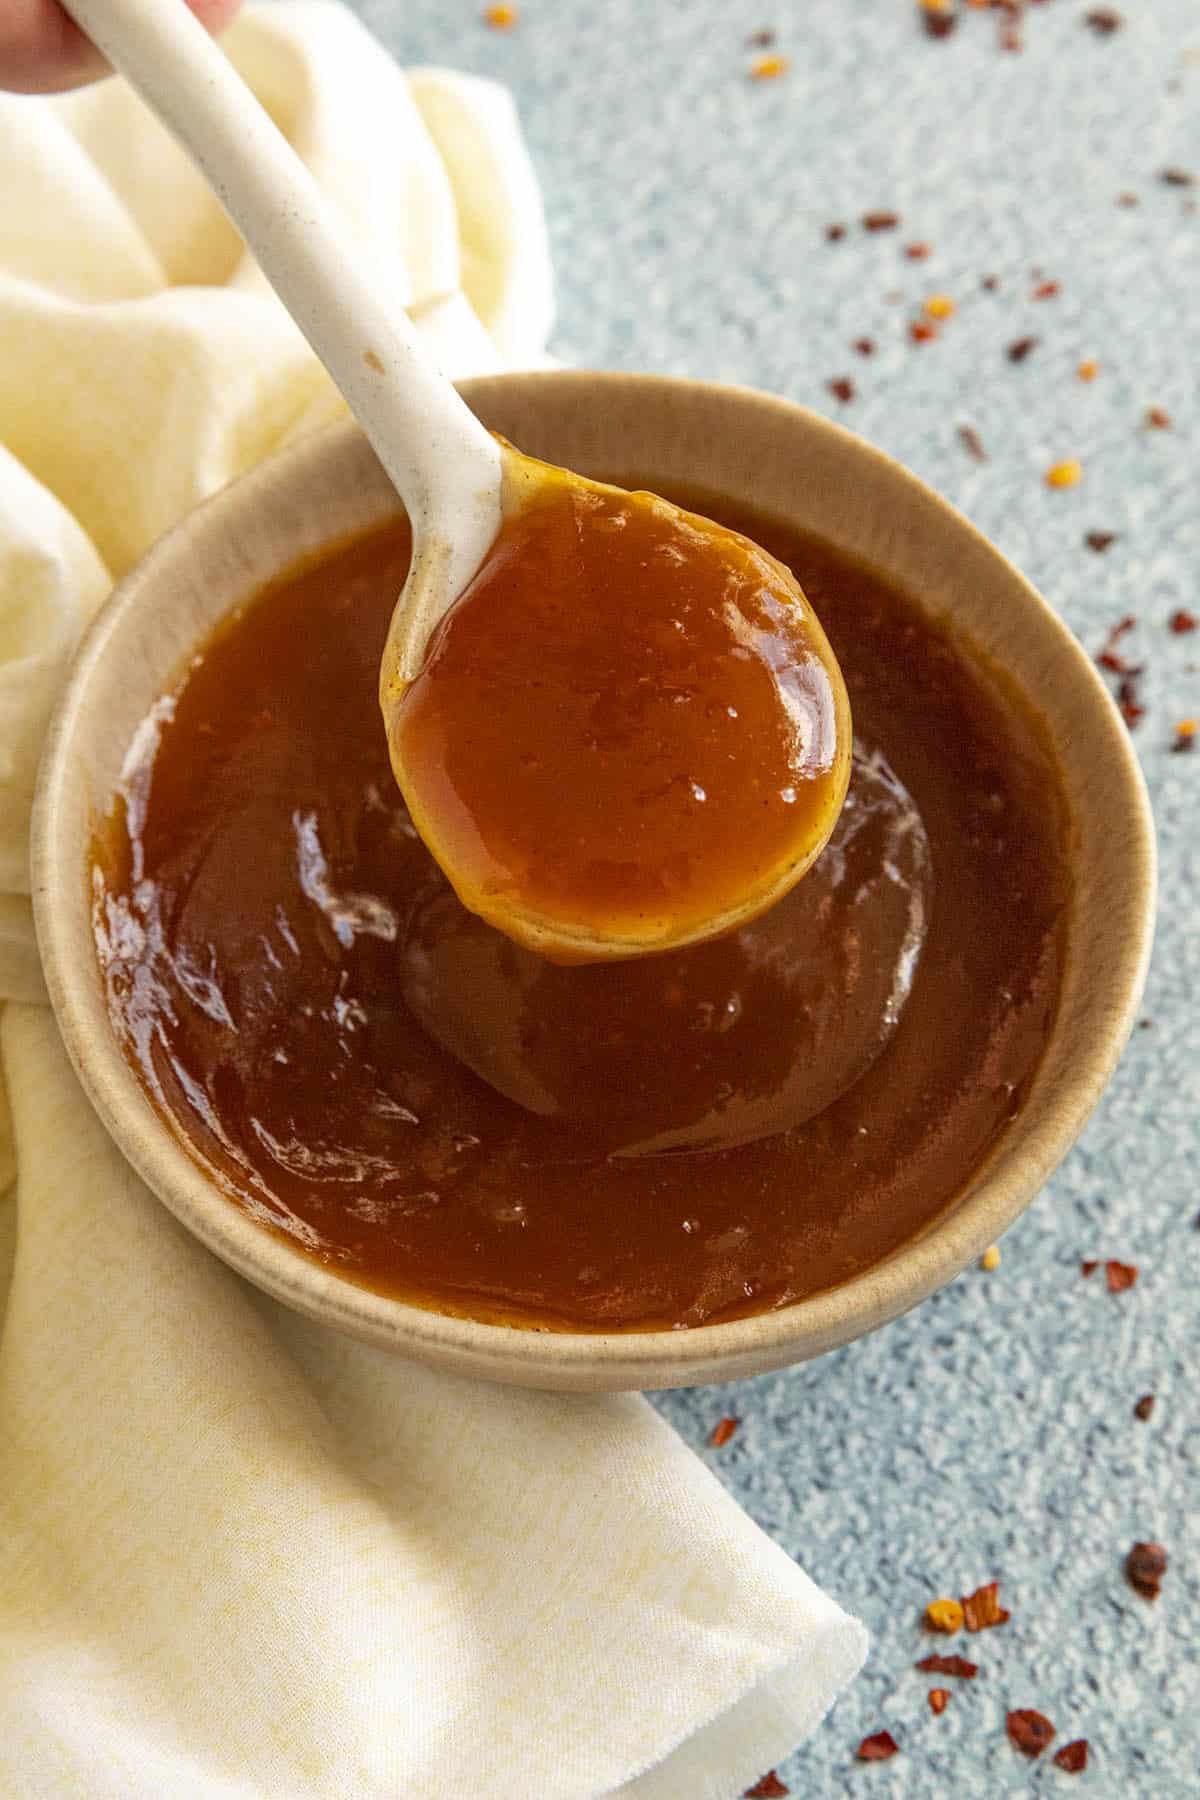 Sweet and Sour Sauce Recipe